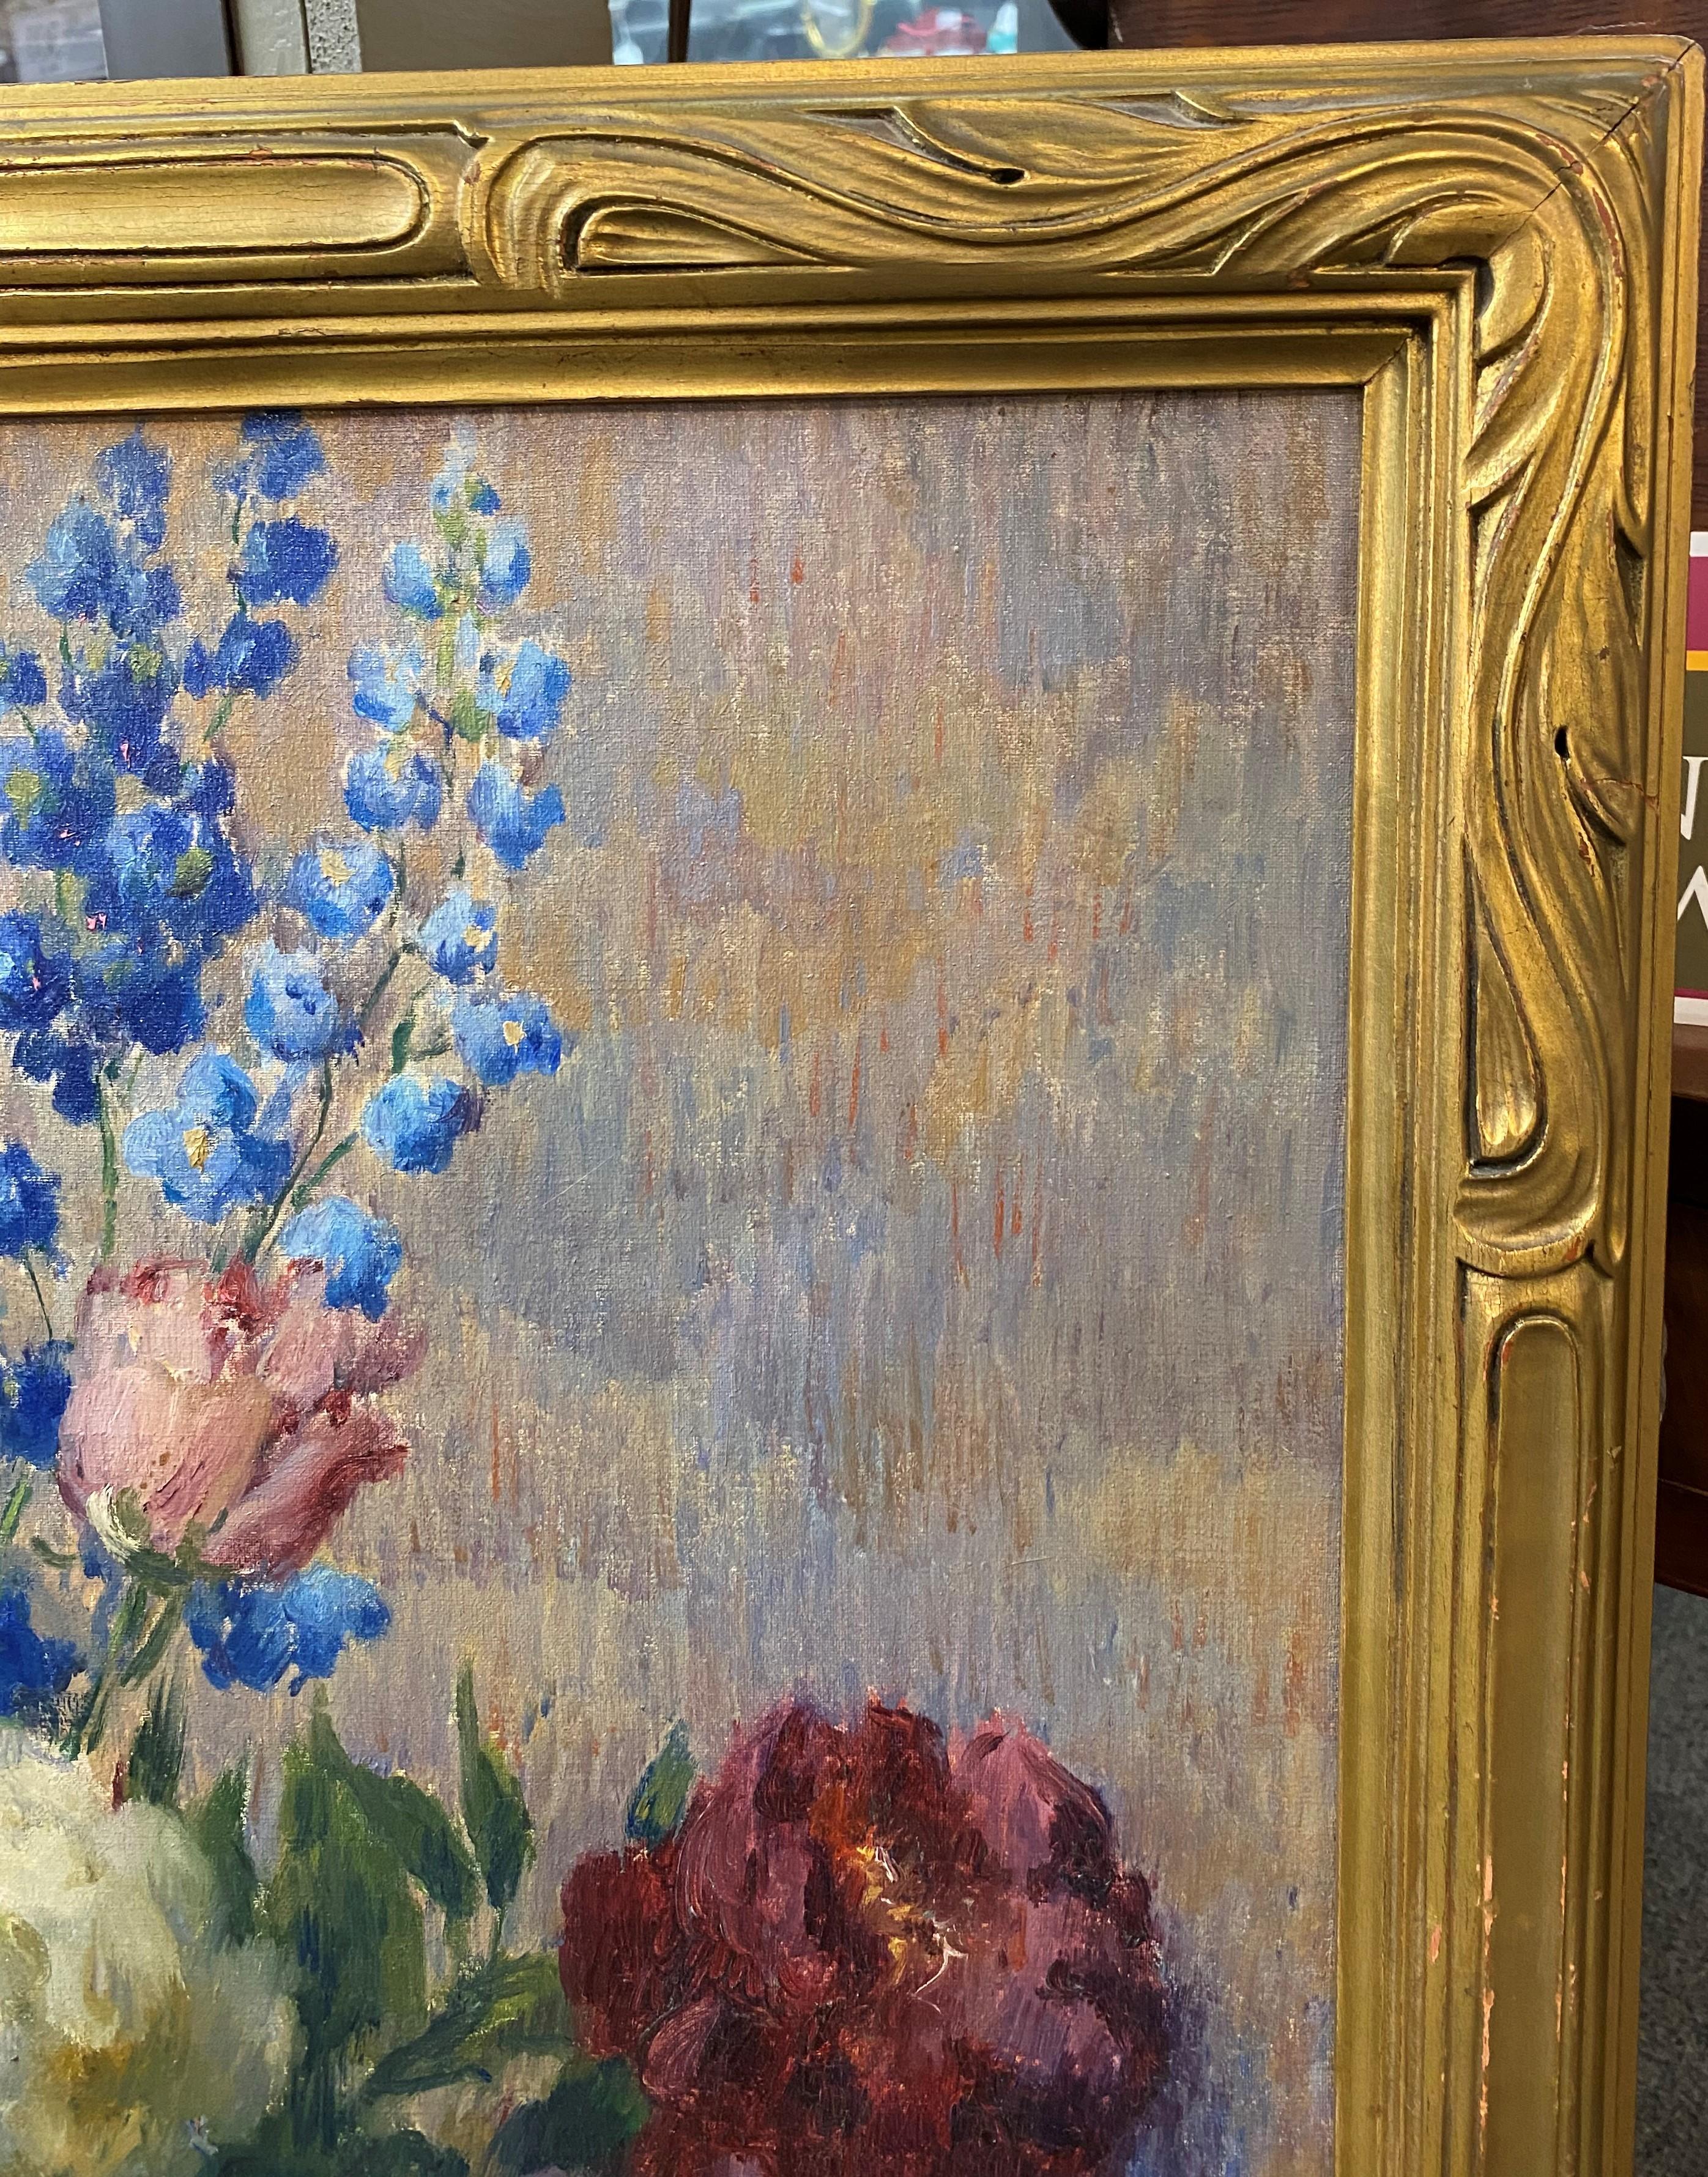 Peonies & Delphinium - Realist Painting by Carle J Blenner